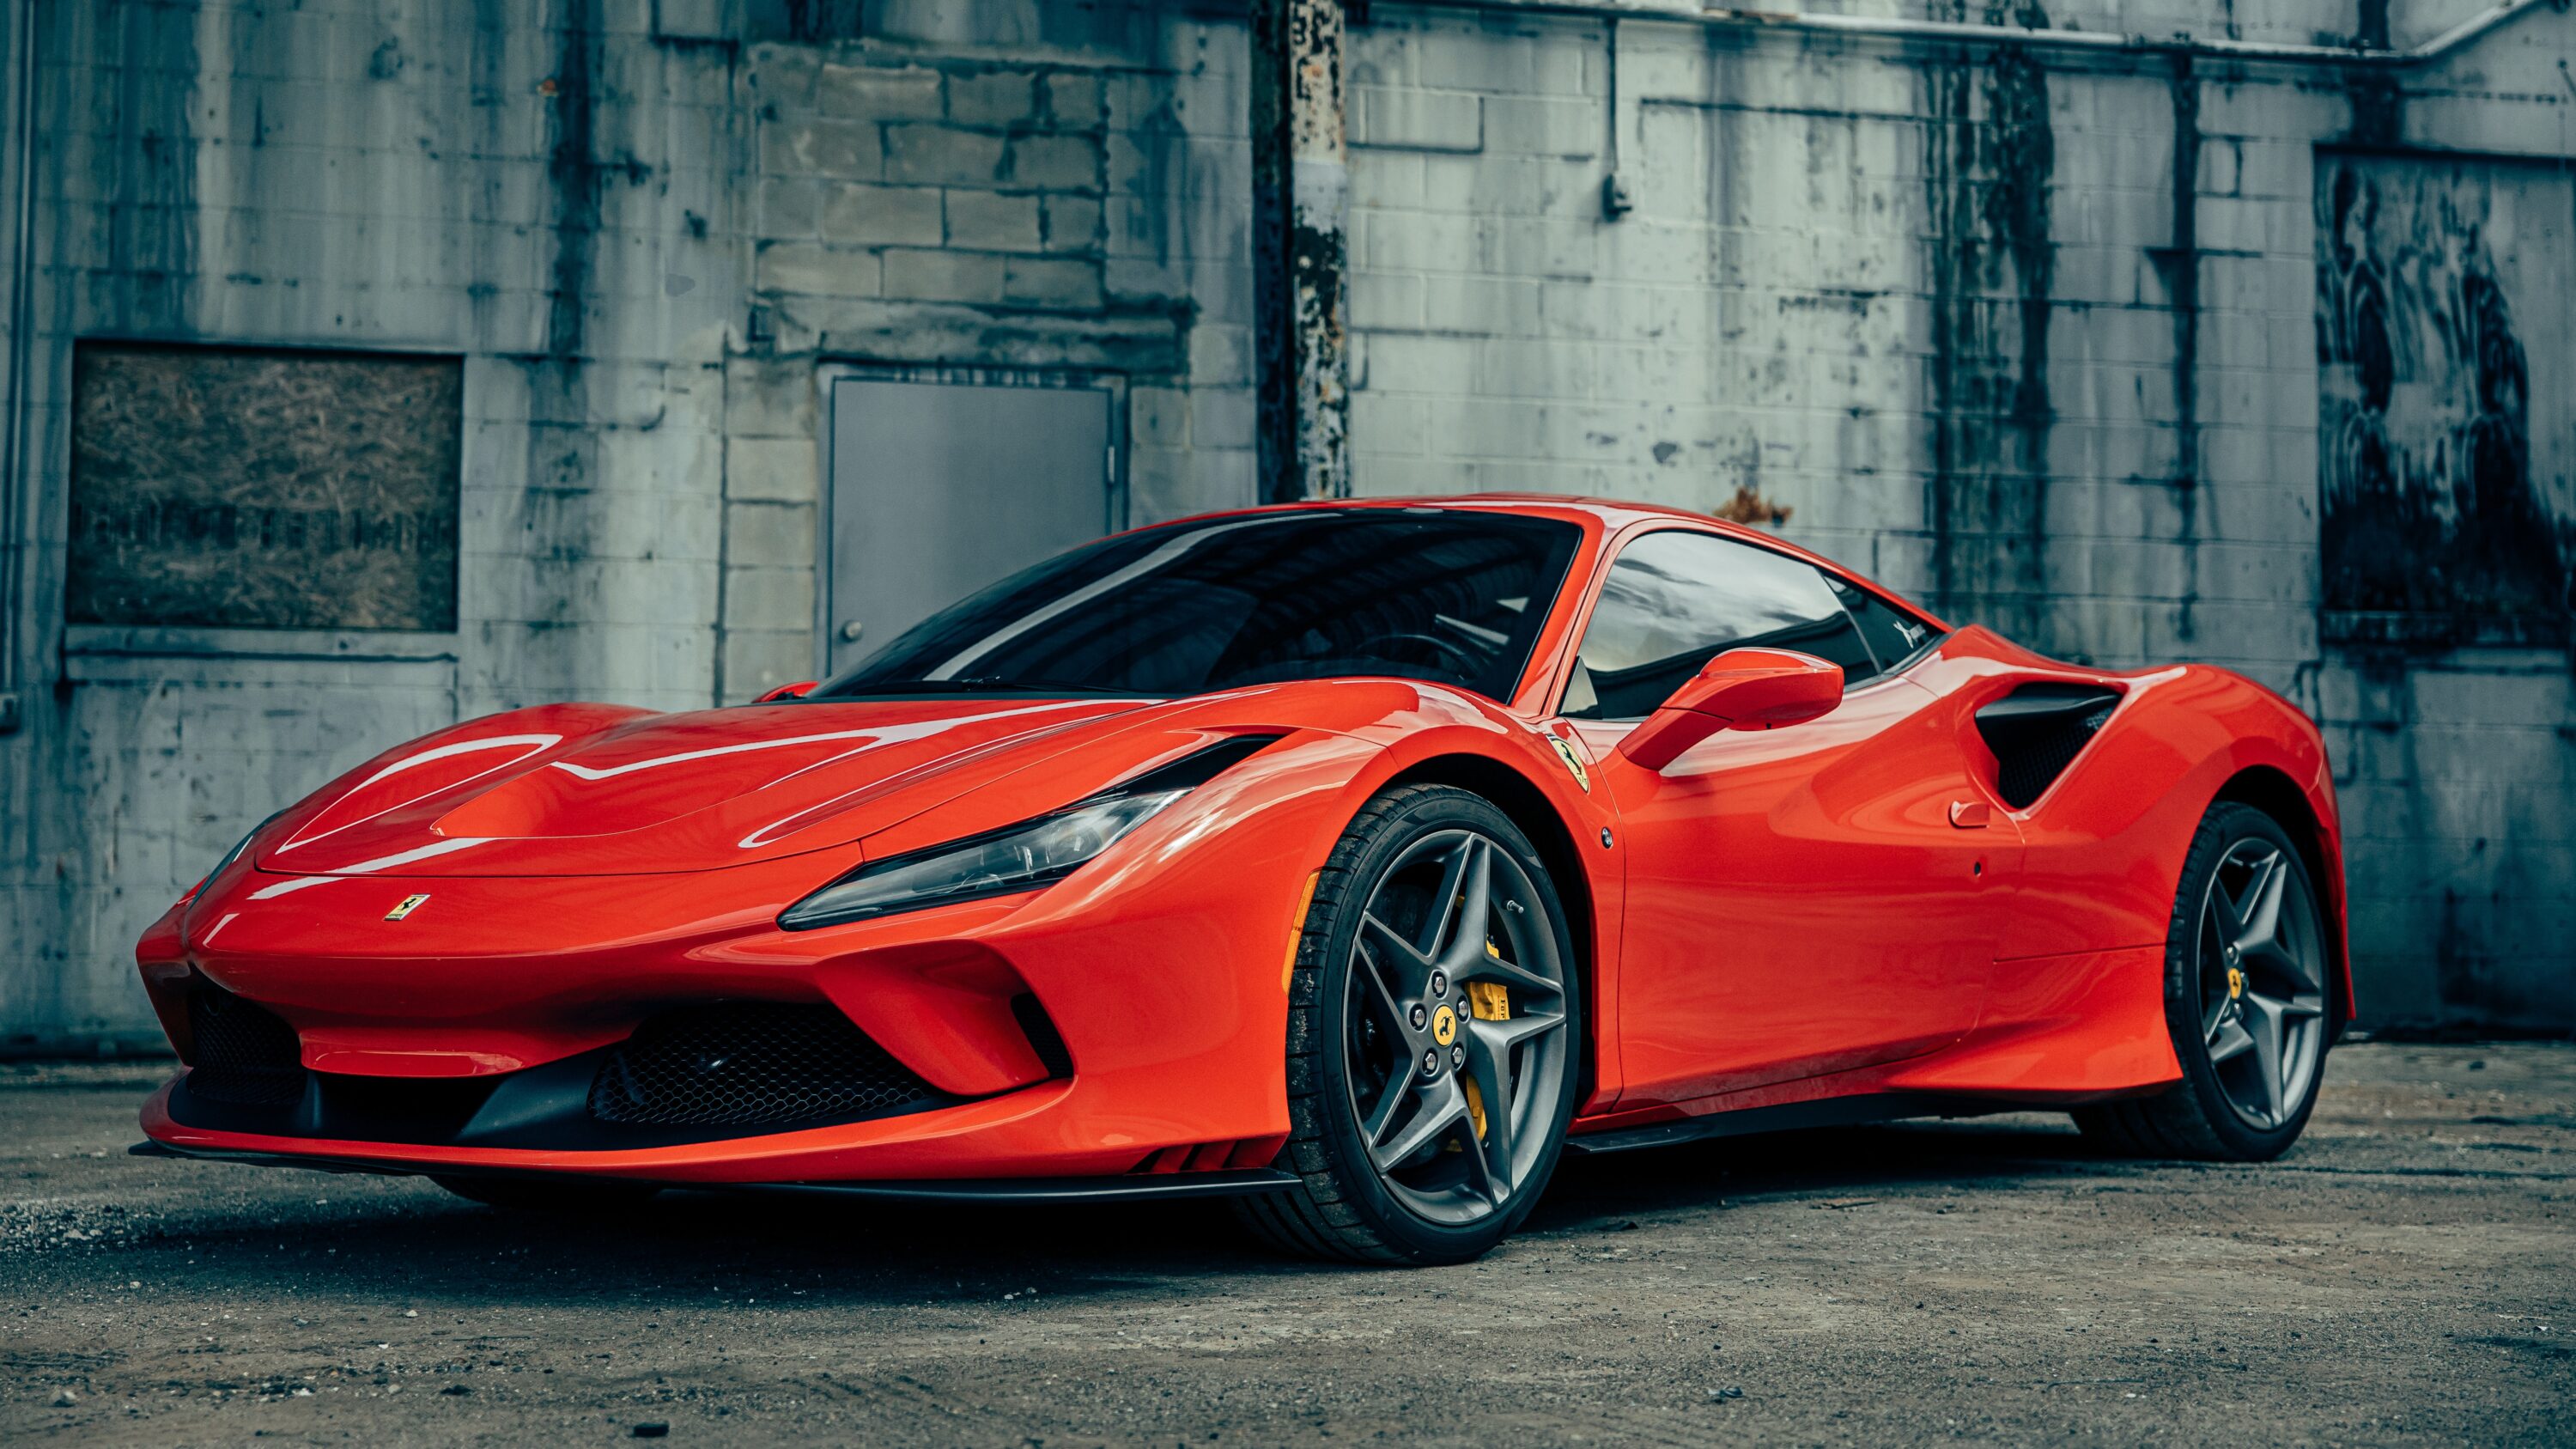 Ferrari opens doors to crypto payments in the US